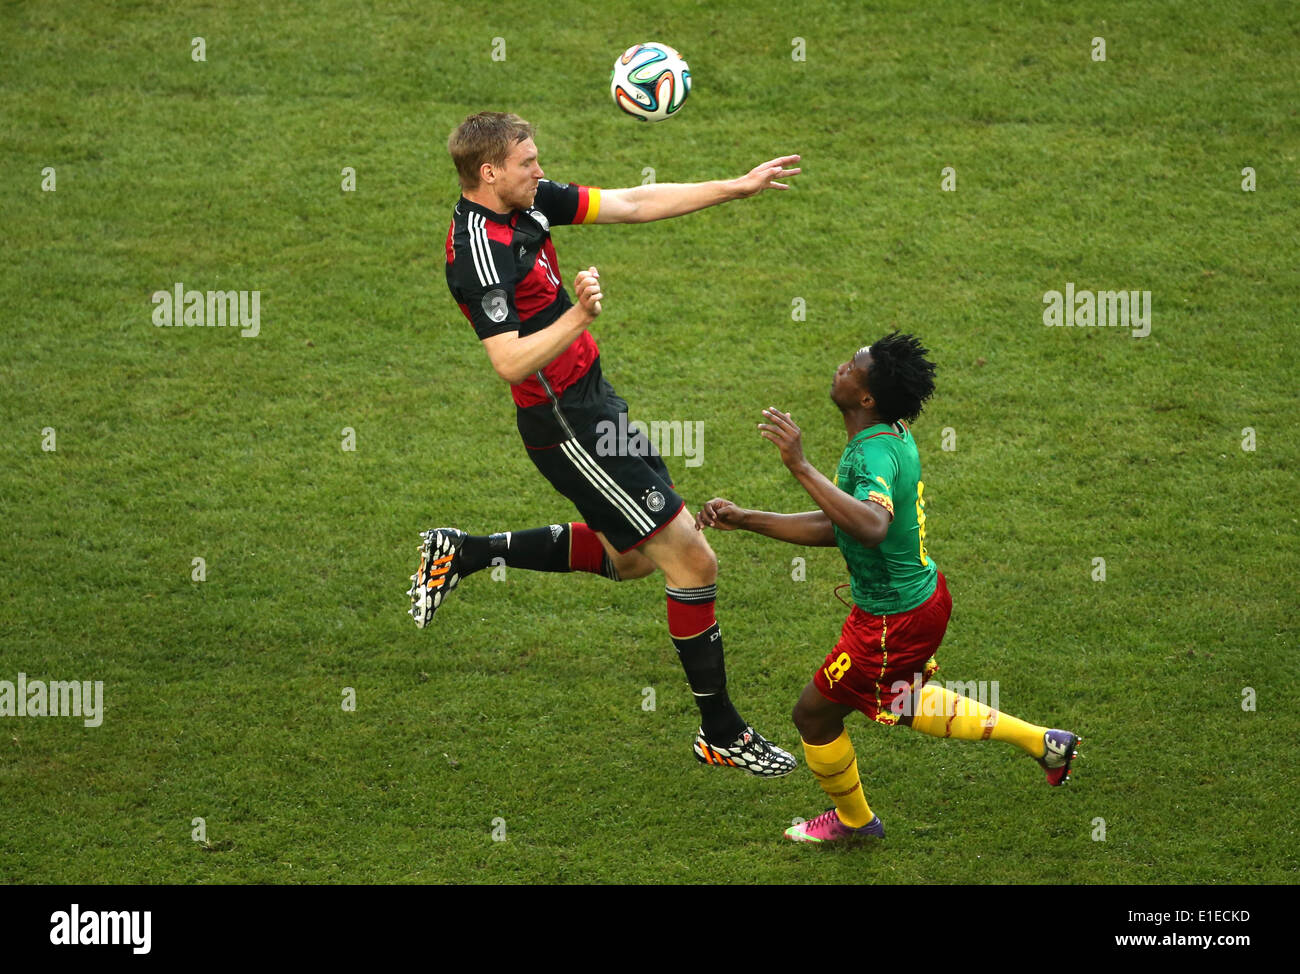 Germany's Per Mertesacker (L) in action against Cameroon's Benjamin Moukandjo during the friendly soccer match between Germany and Cameroon at the Borussia Park stadium in Moenchengladbach, Germany, 01 June 2014. Photo: Rolf Vennenbernd/dpa Stock Photo